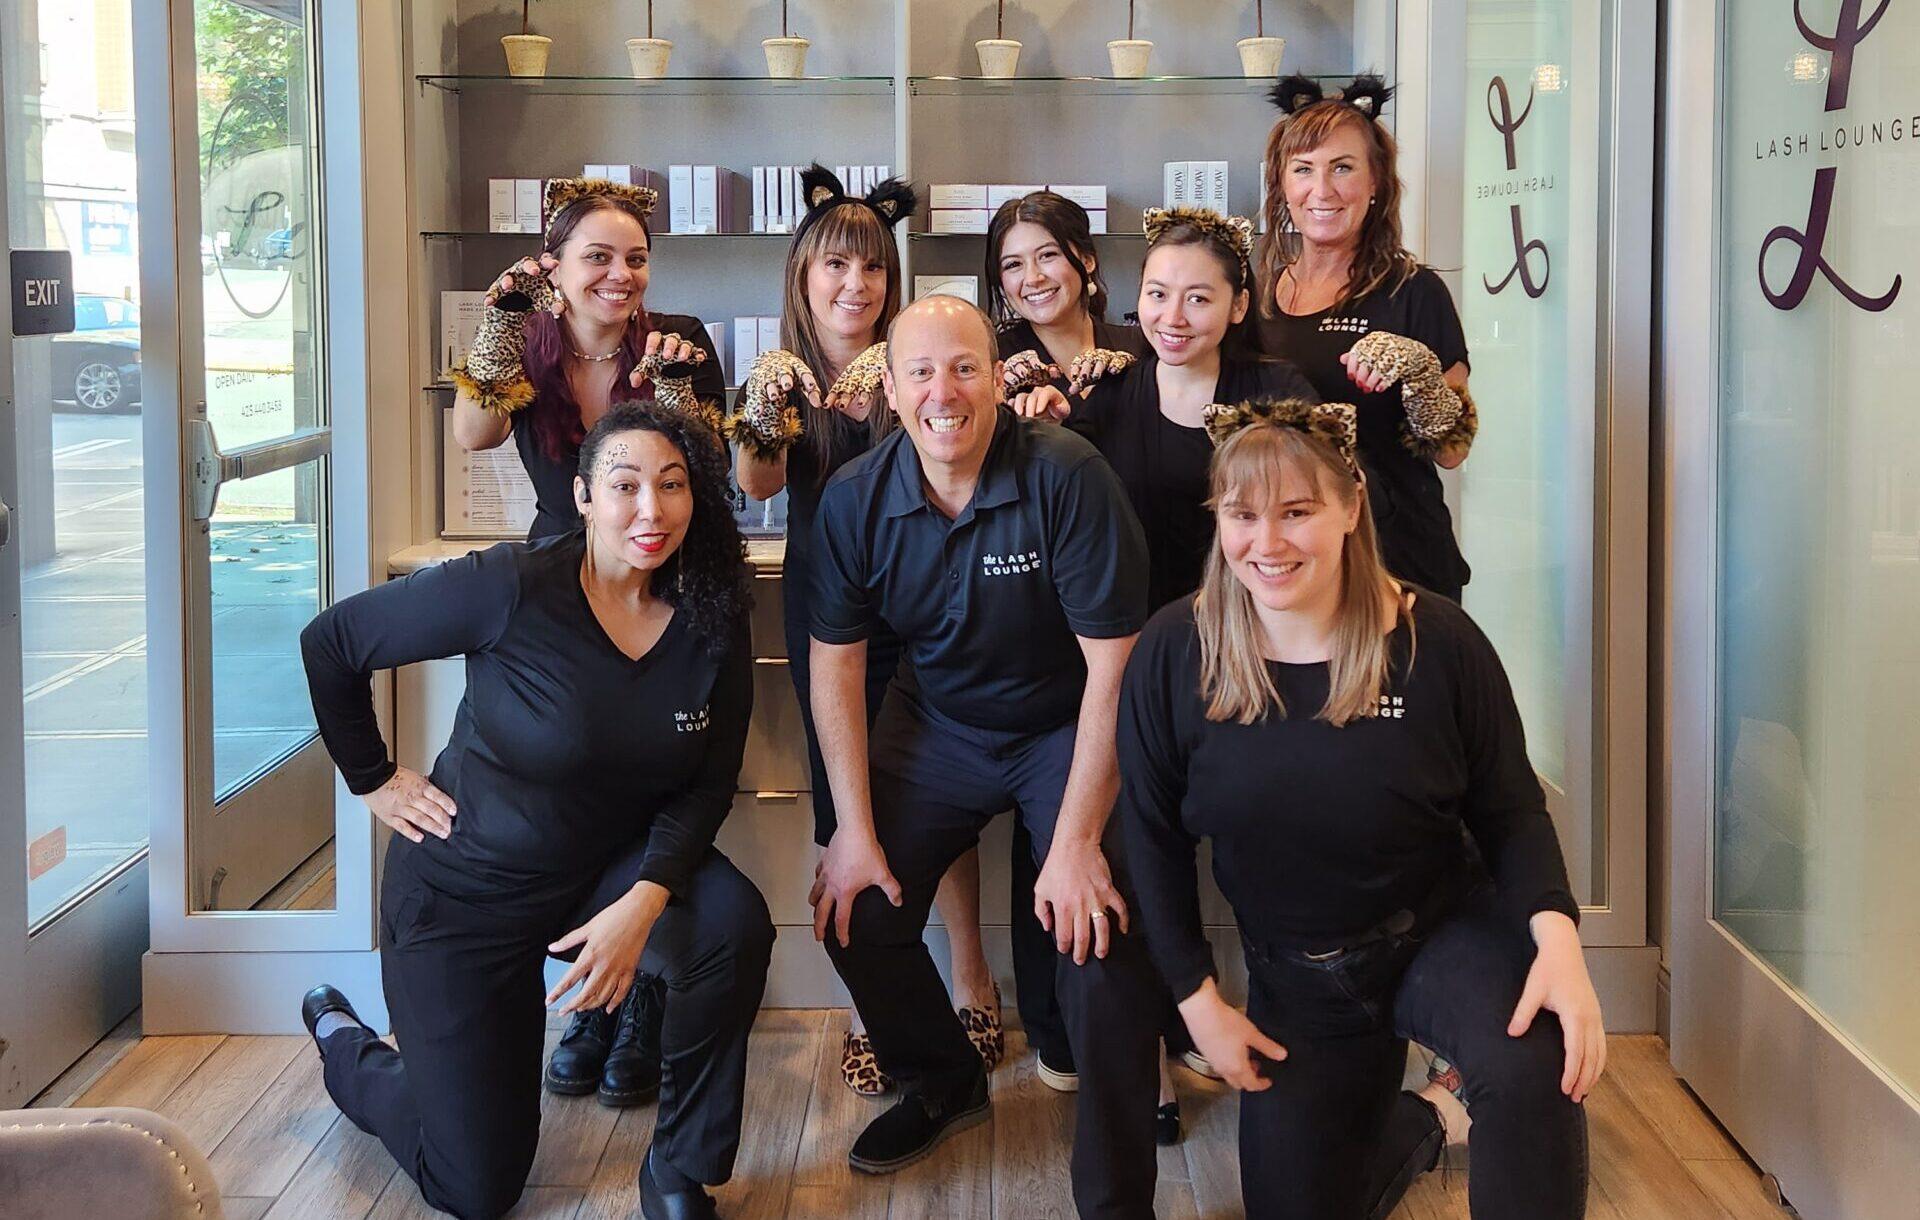 A group of business owners smiling together inside The Lash Lounge franchise.